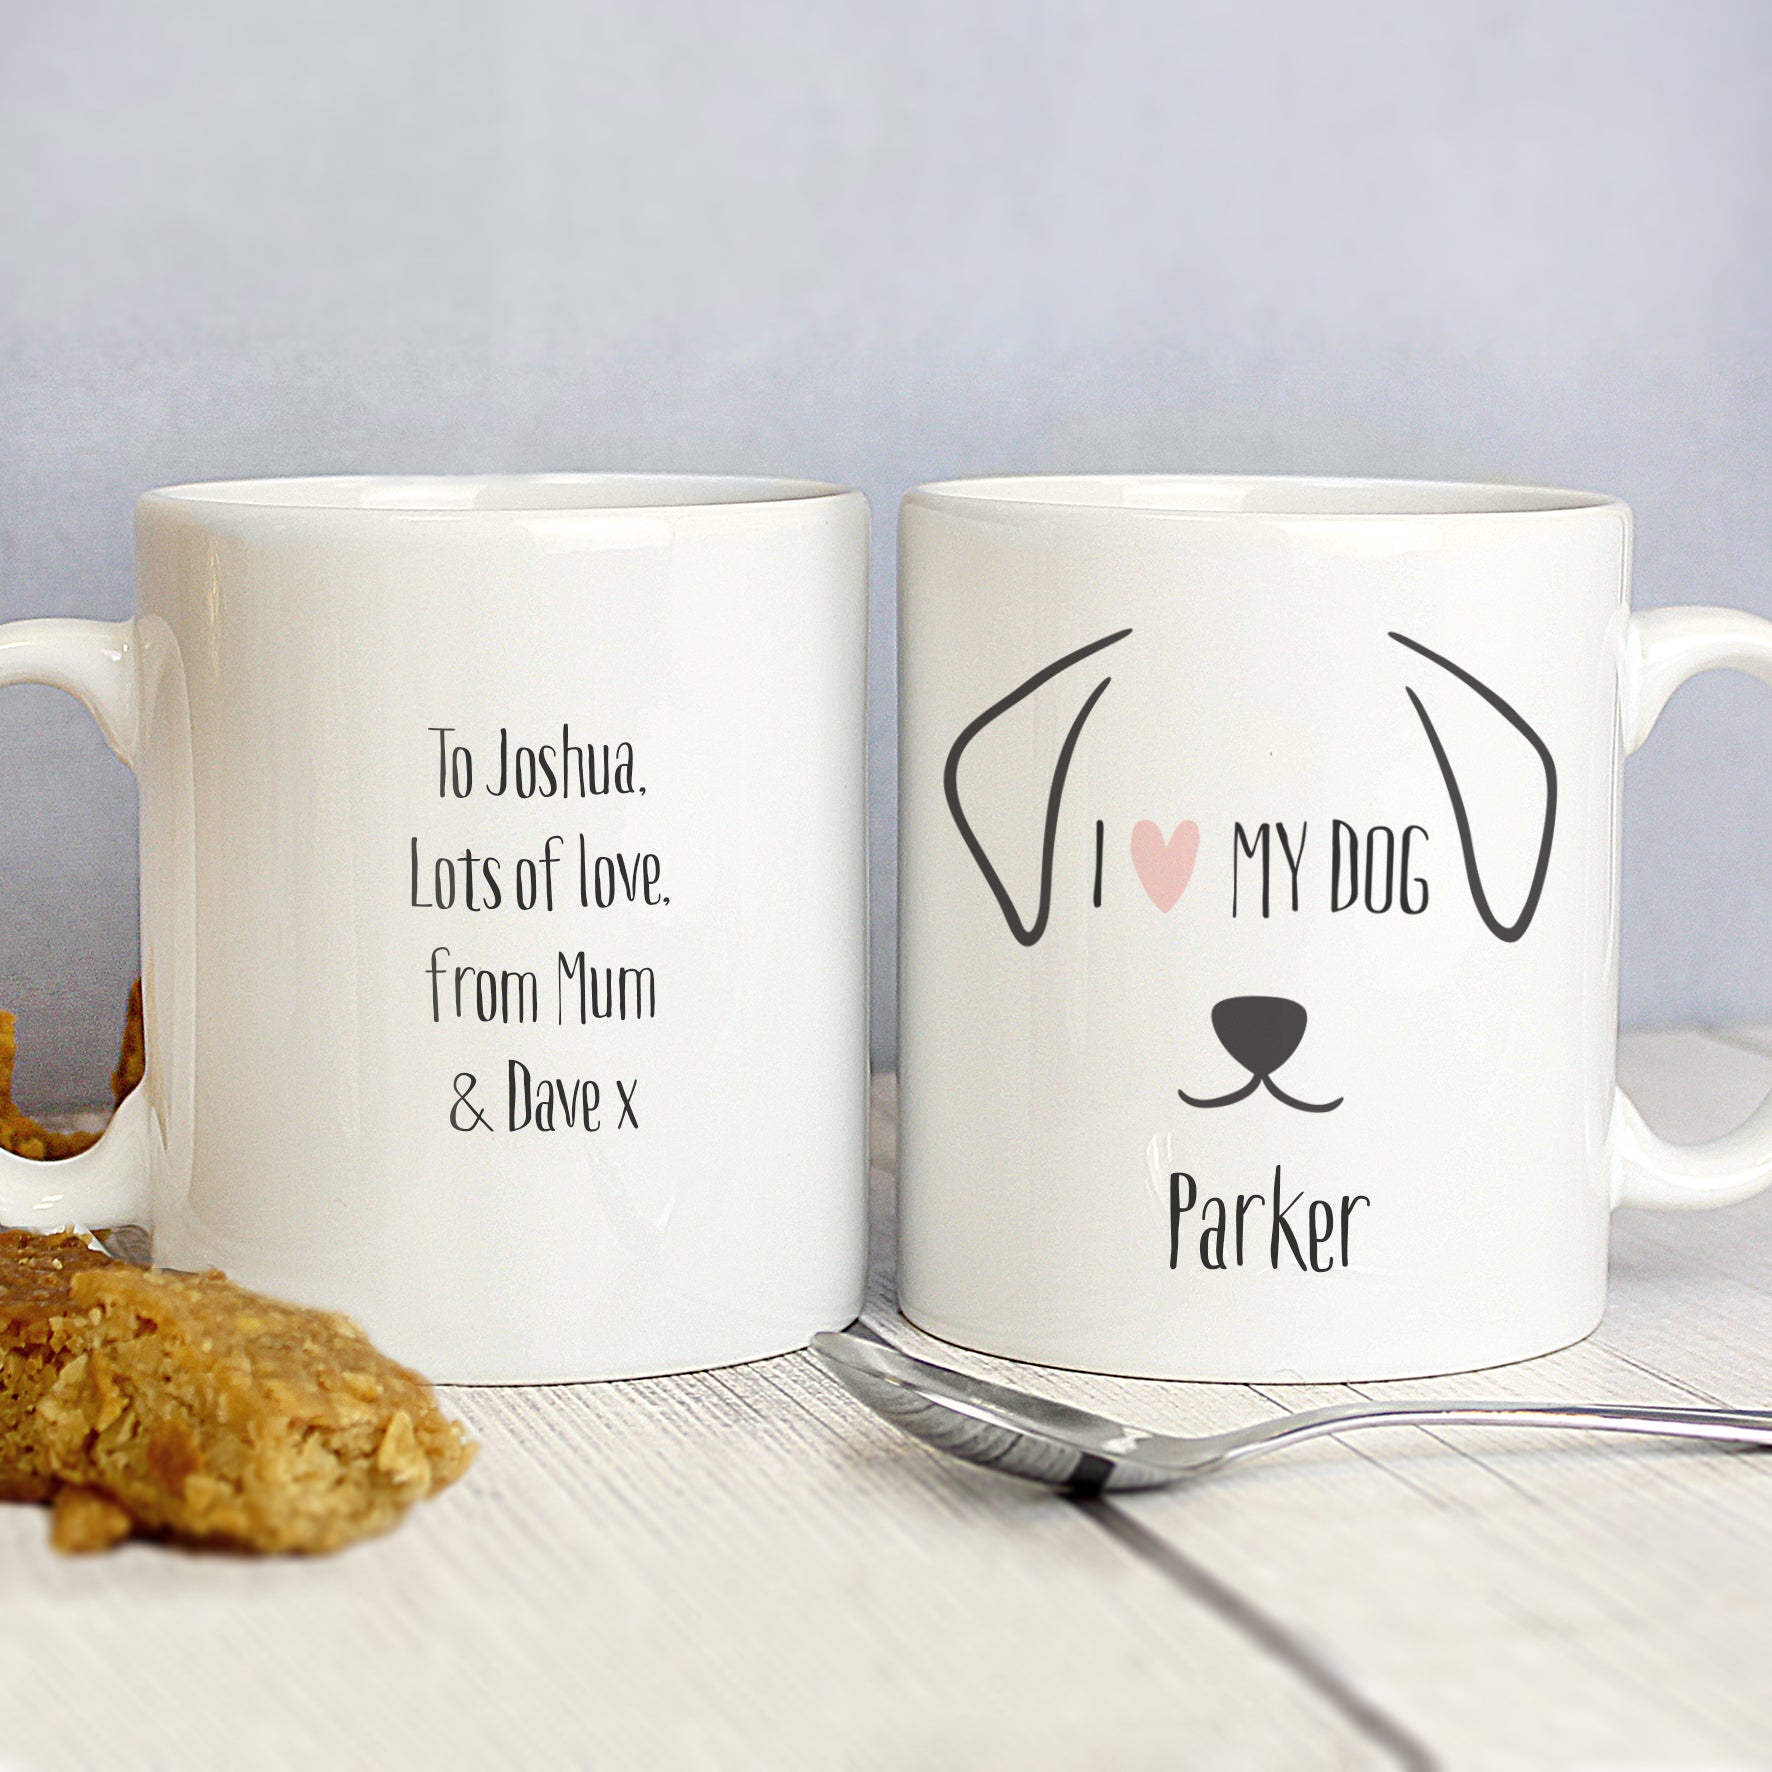 Front and back image of a white ceramic mug with a fun dog illustration that can be personalised with a dog's name and a message of your choice